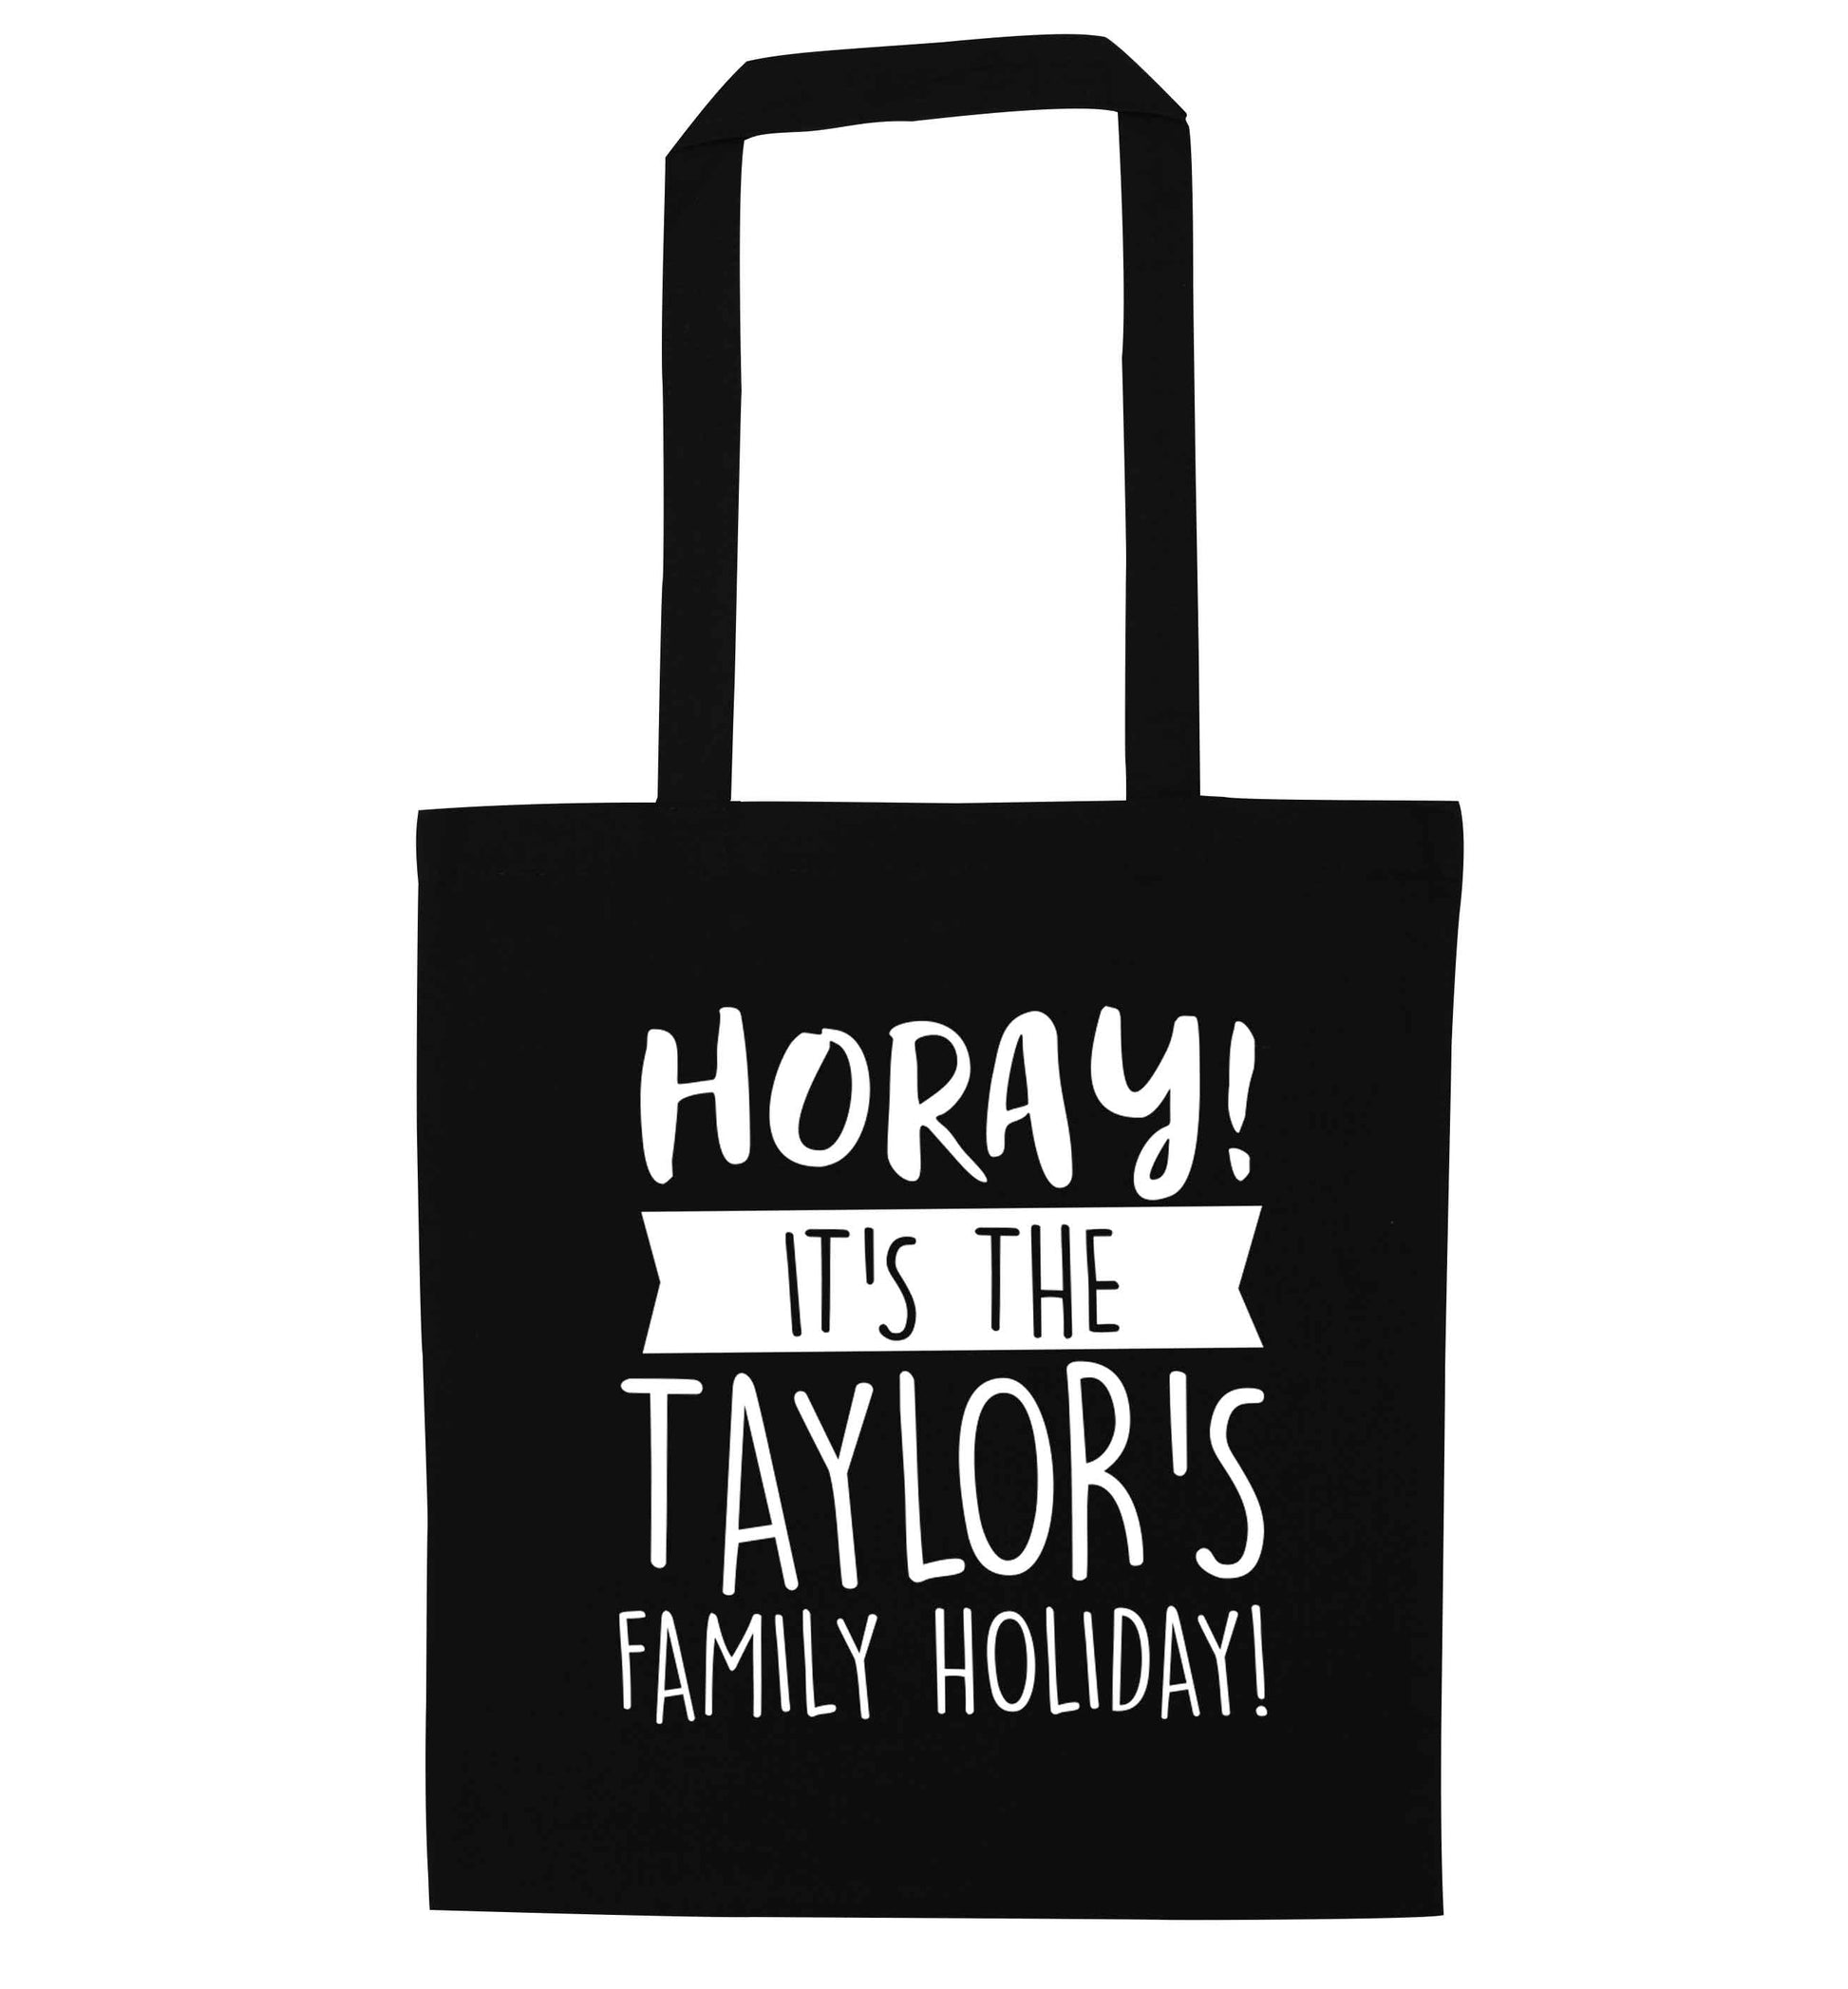 Horay it's the Taylor's family holiday! personalised item black tote bag